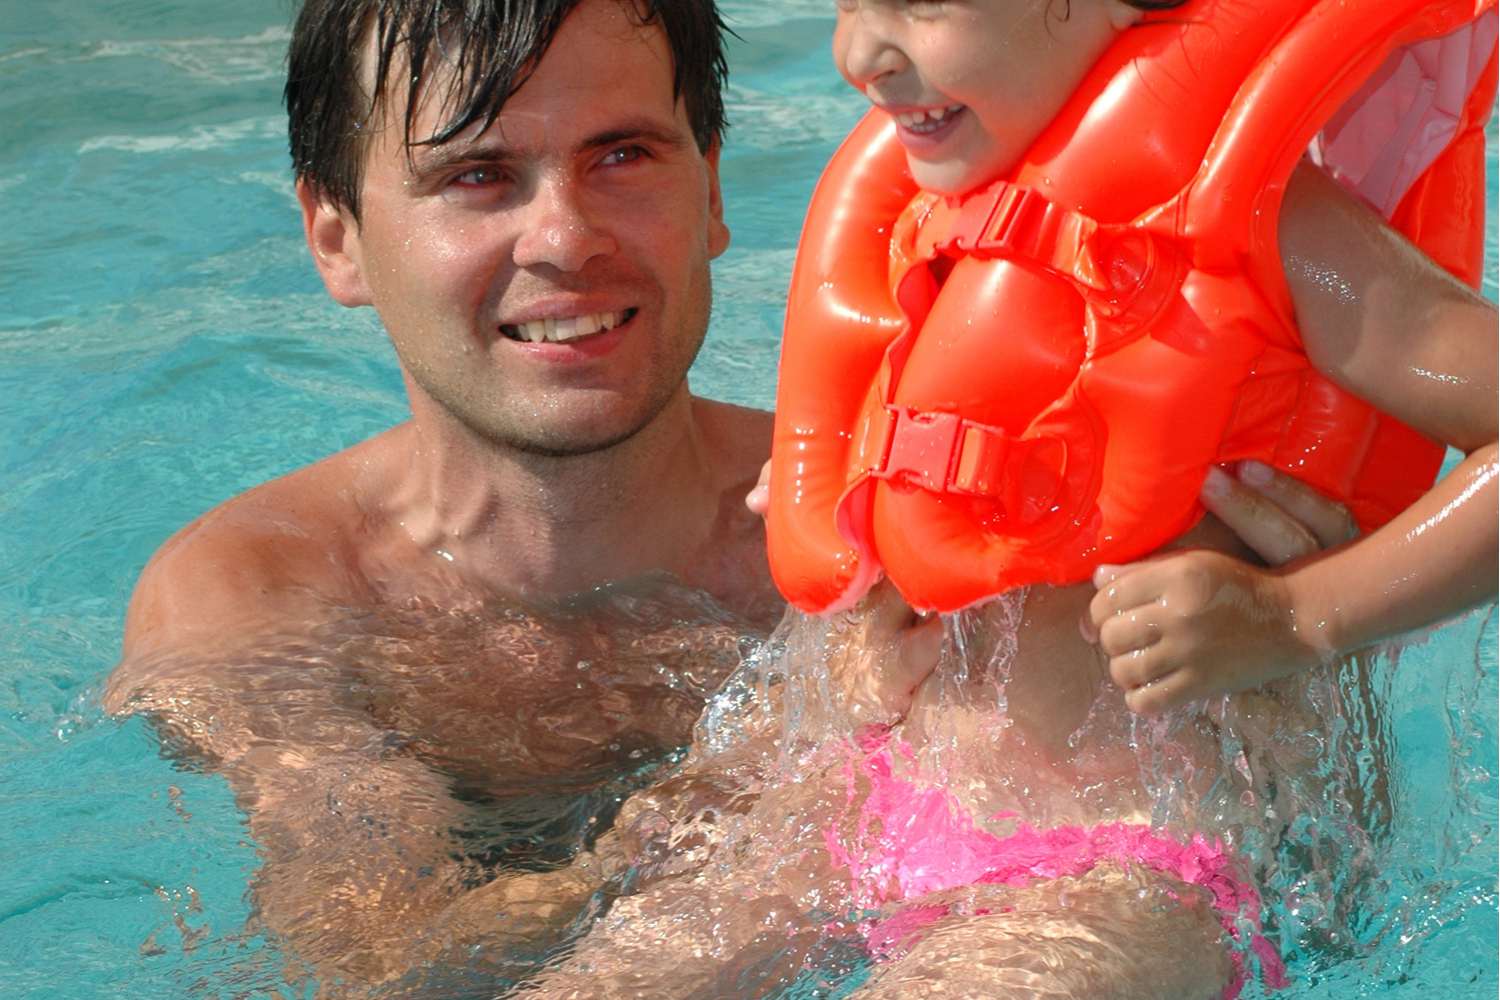 Child Drowning Prevention